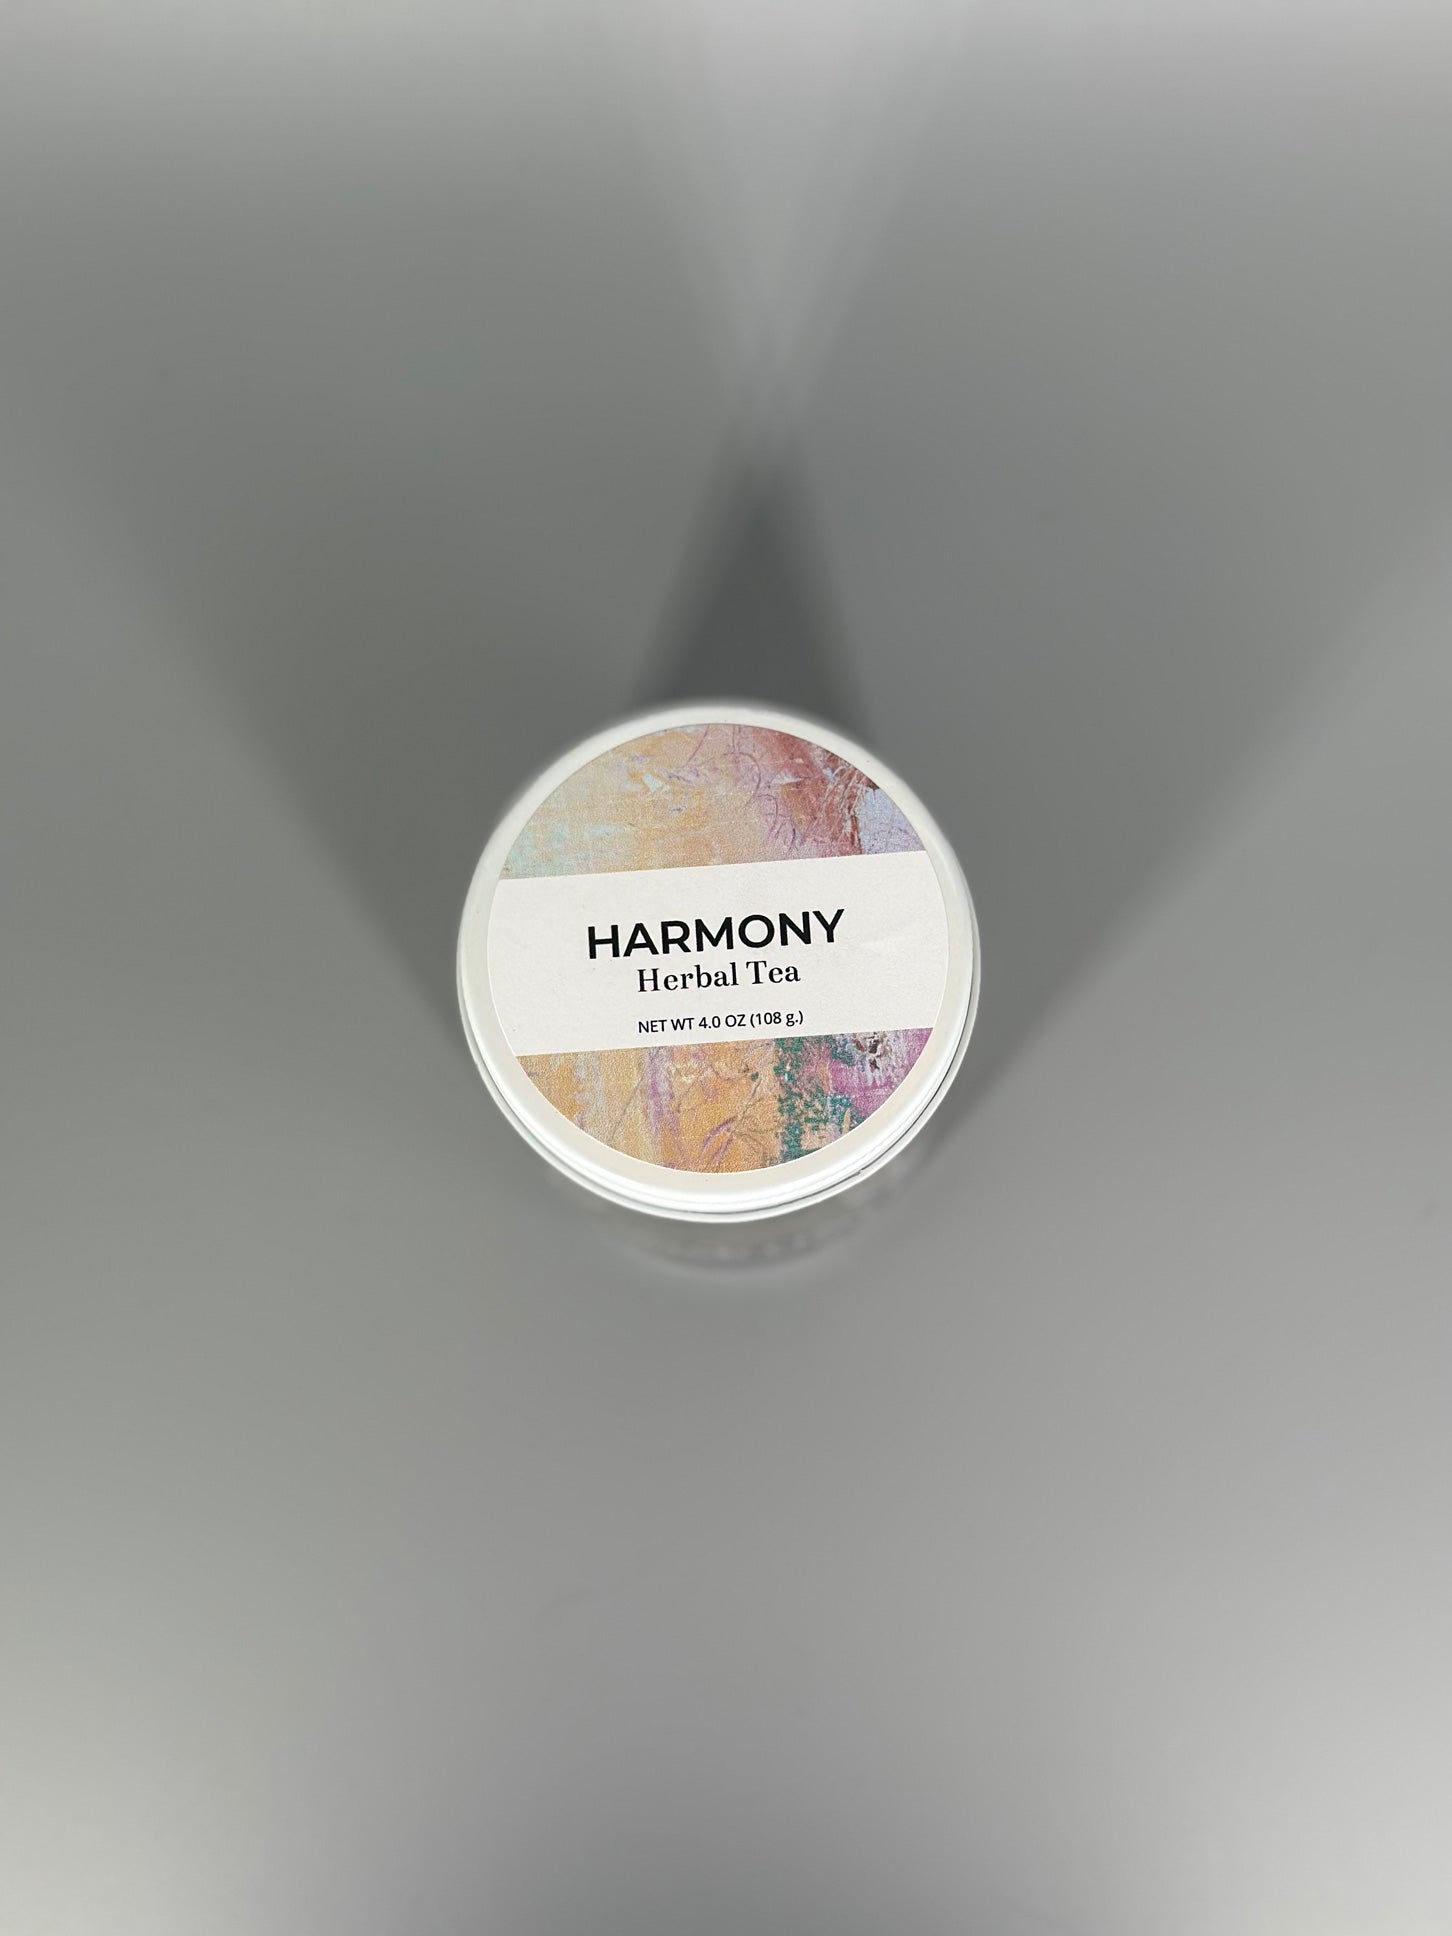 Chicory Tea Co.'s Harmony Herbal Tea in the jar, view from the top